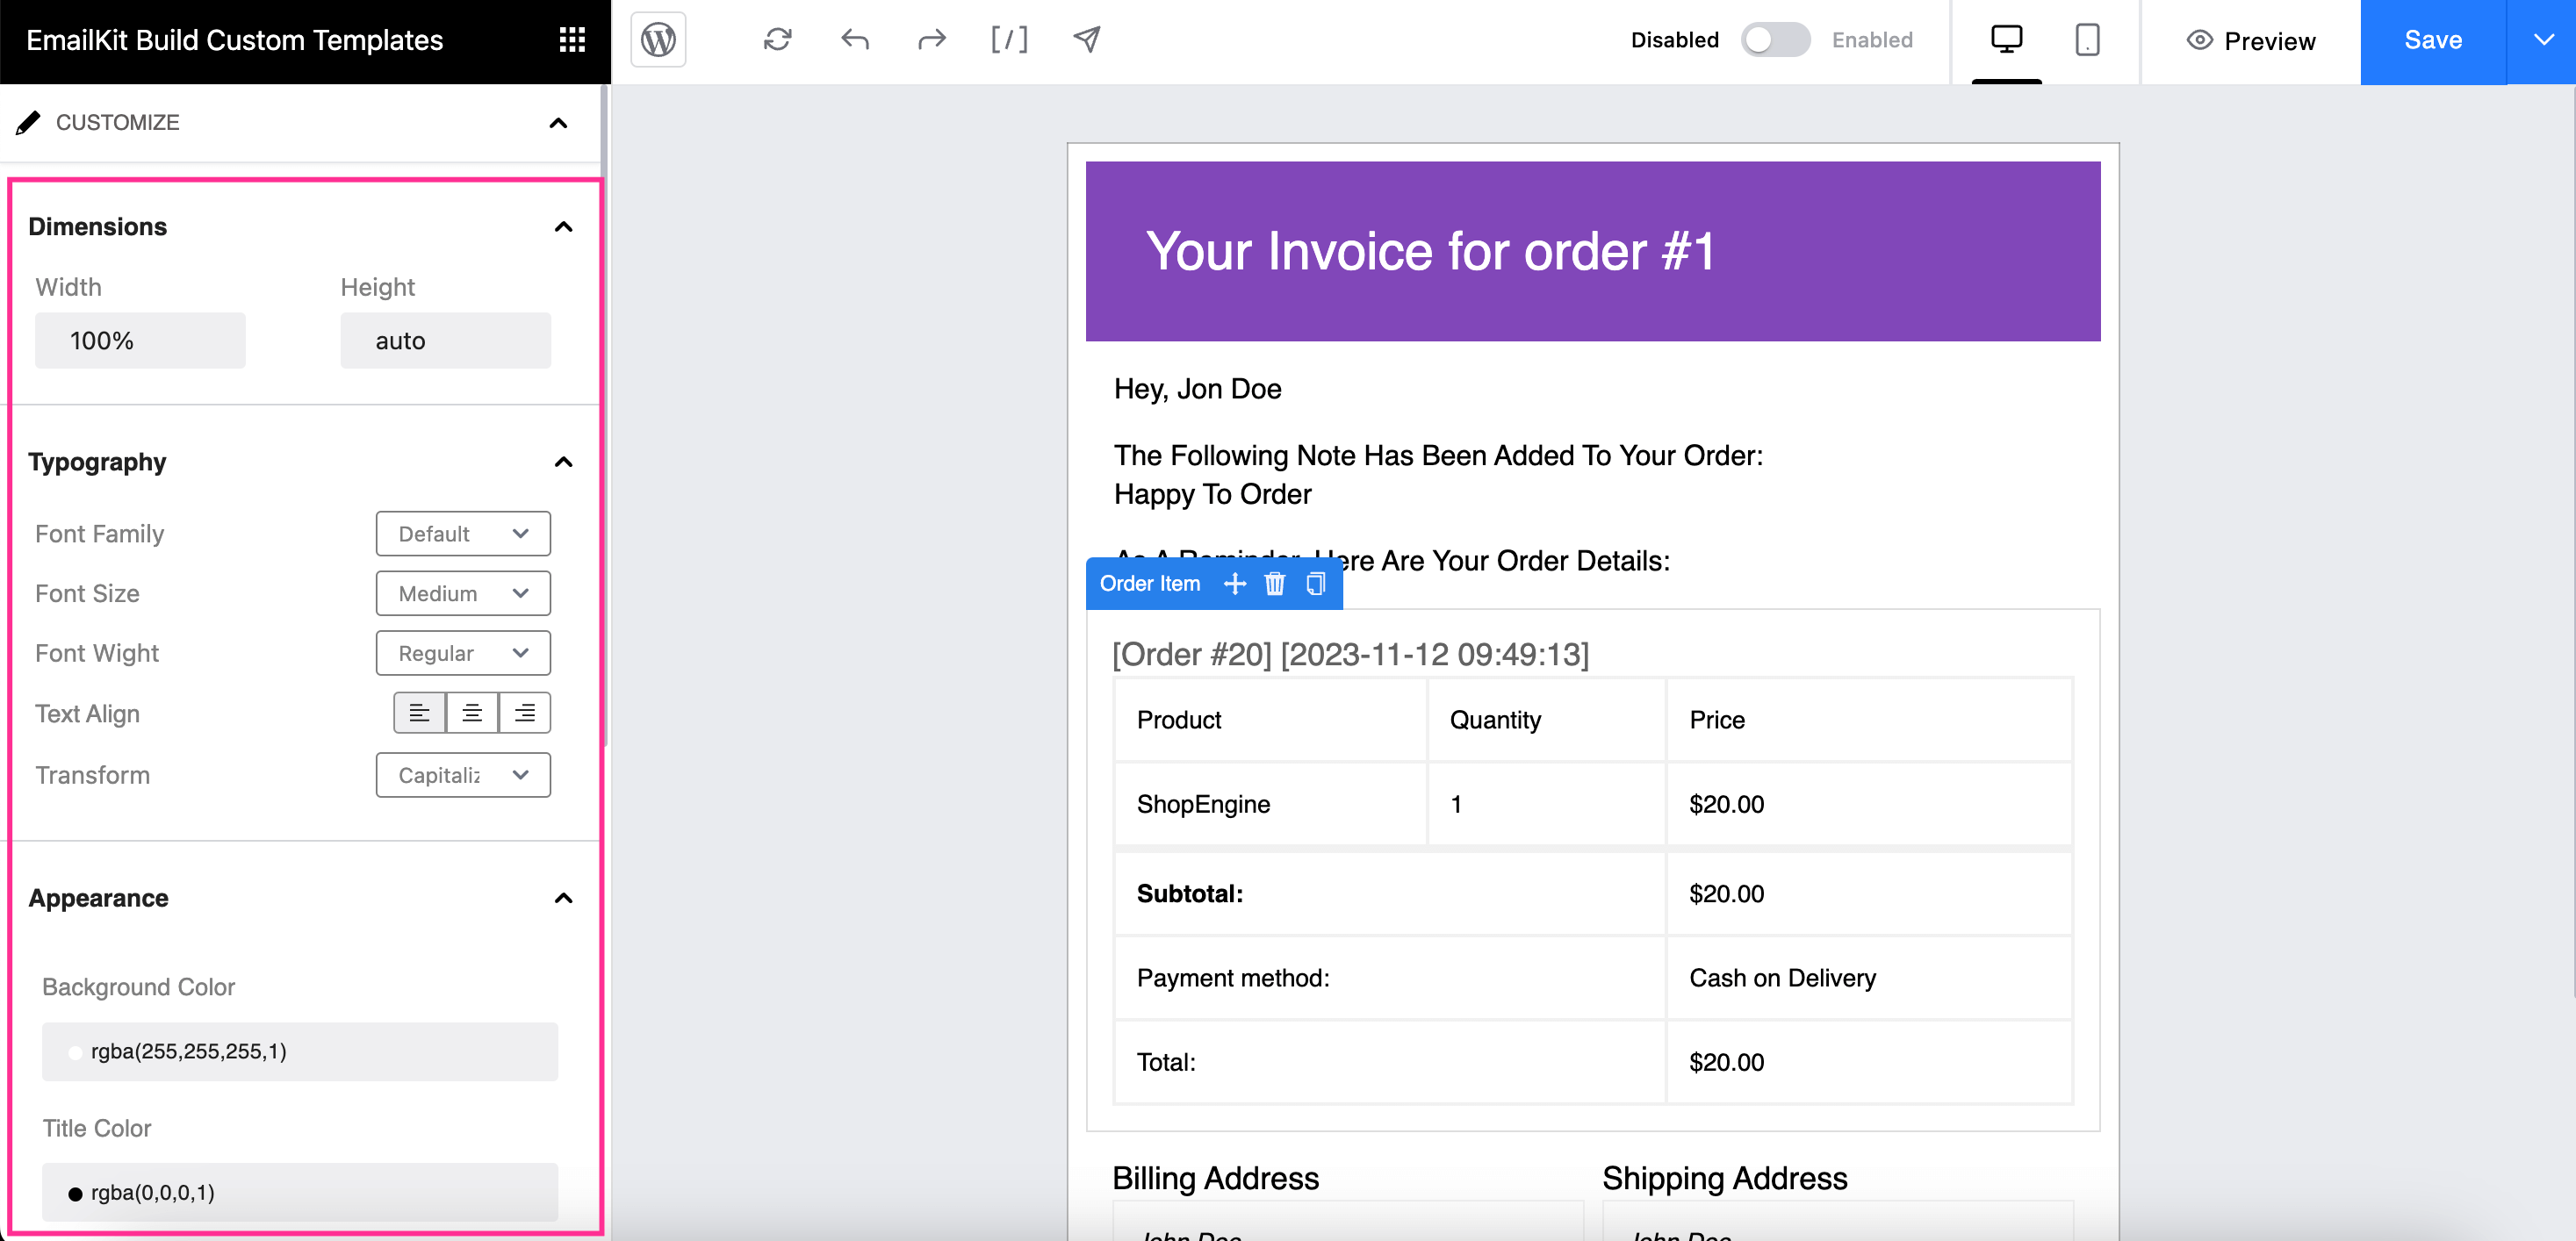 Customize WooCommerce emails with EmailKit